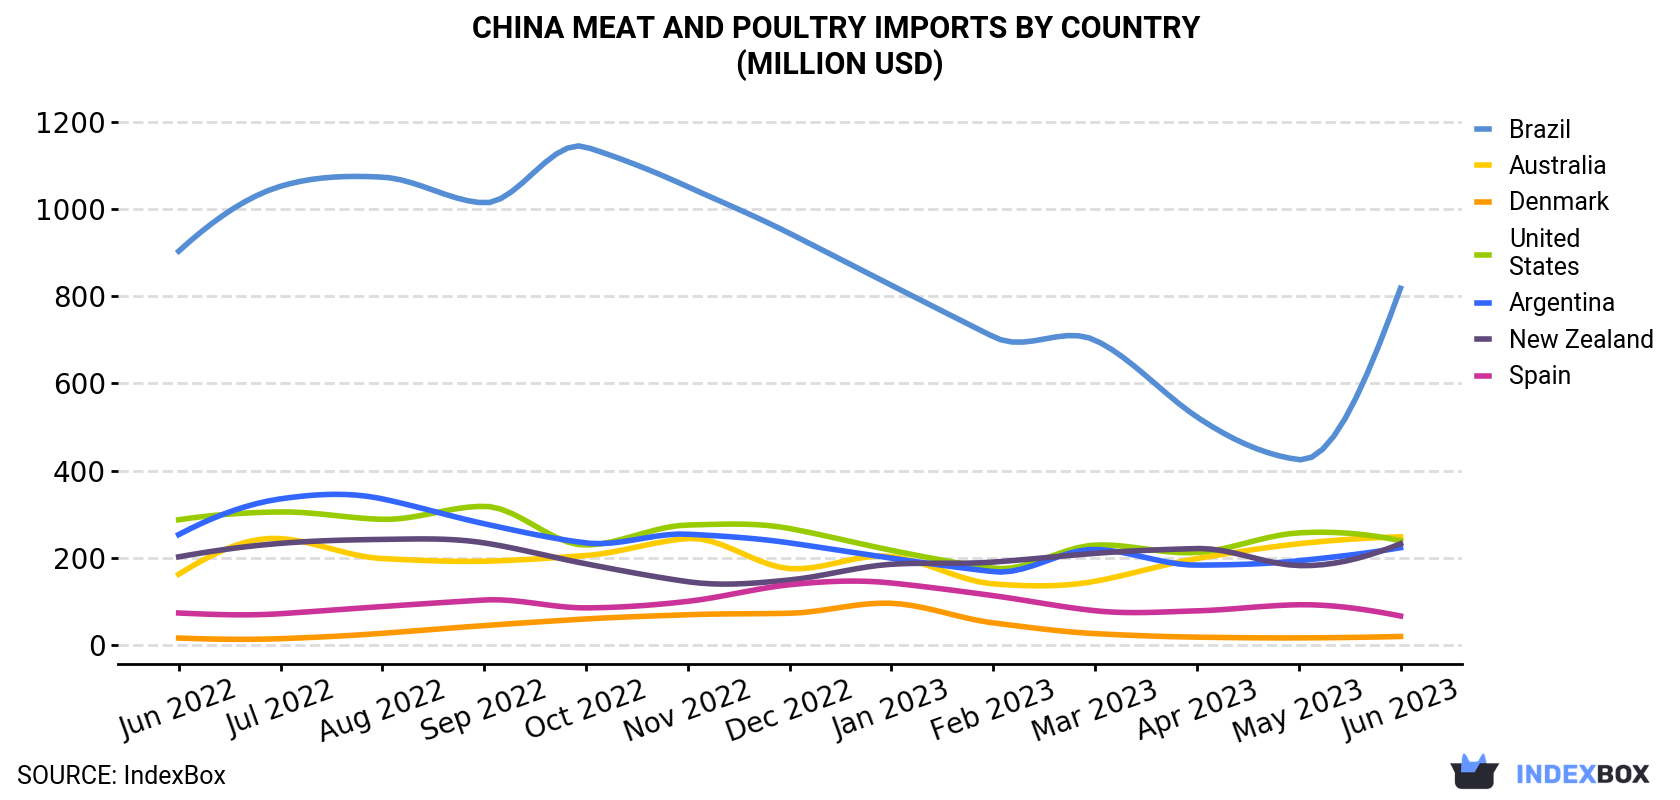 China Meat And Poultry Imports By Country (Million USD)